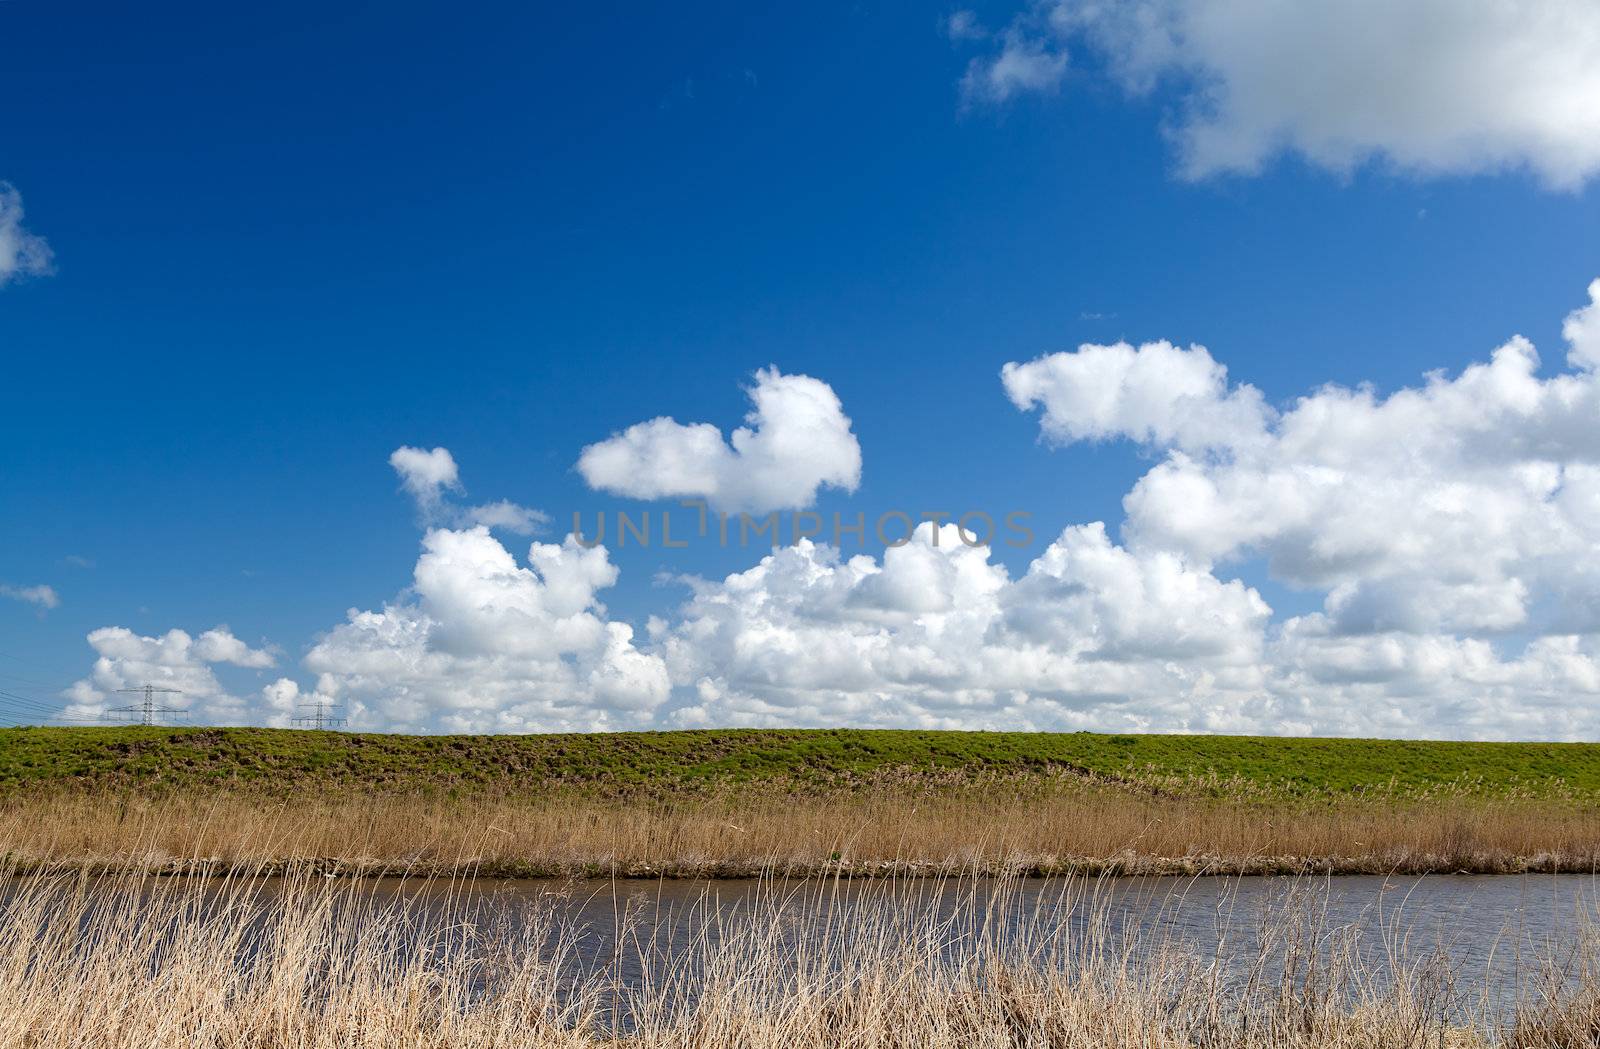 abstract landscape with pasture, river and blue sky with nice clouds